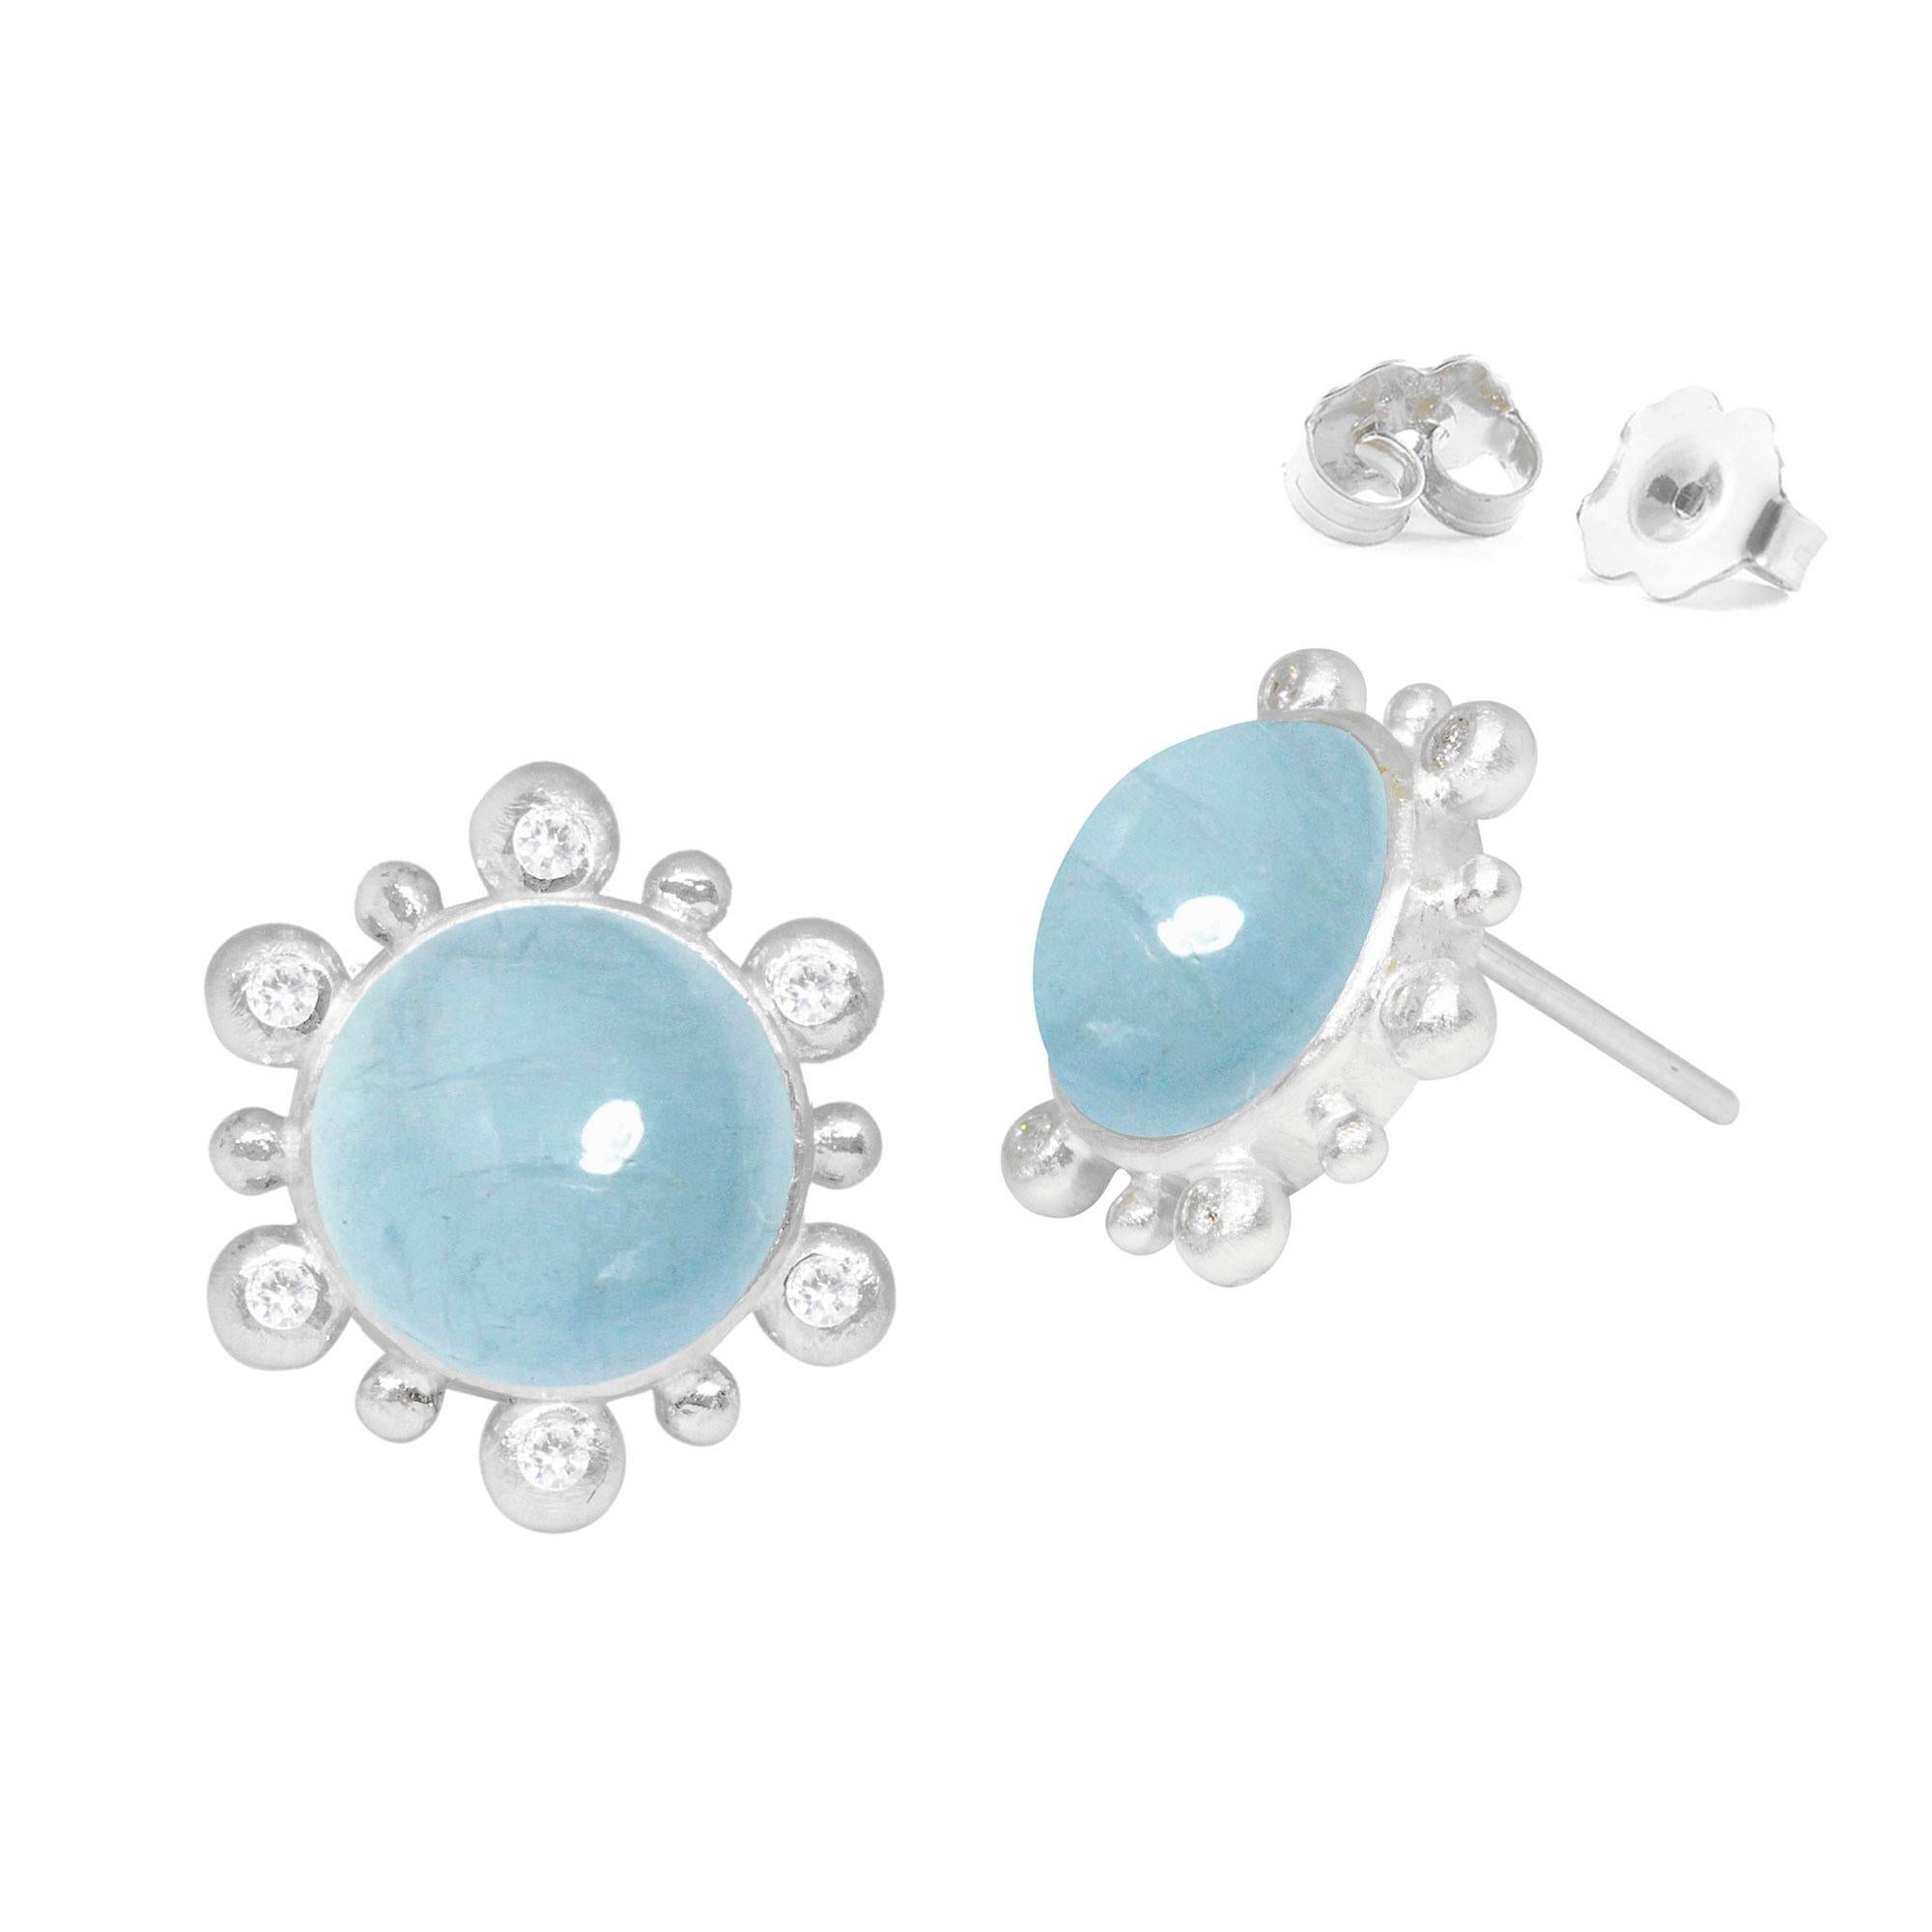 Inner goddess who? She's making herself loud and proud with these beautiful, aquamarine and diamond studs. Aquamarine, protector from all darkness, will leave you standing in your light. Combine wiht your favoirte diamonds or let them shine